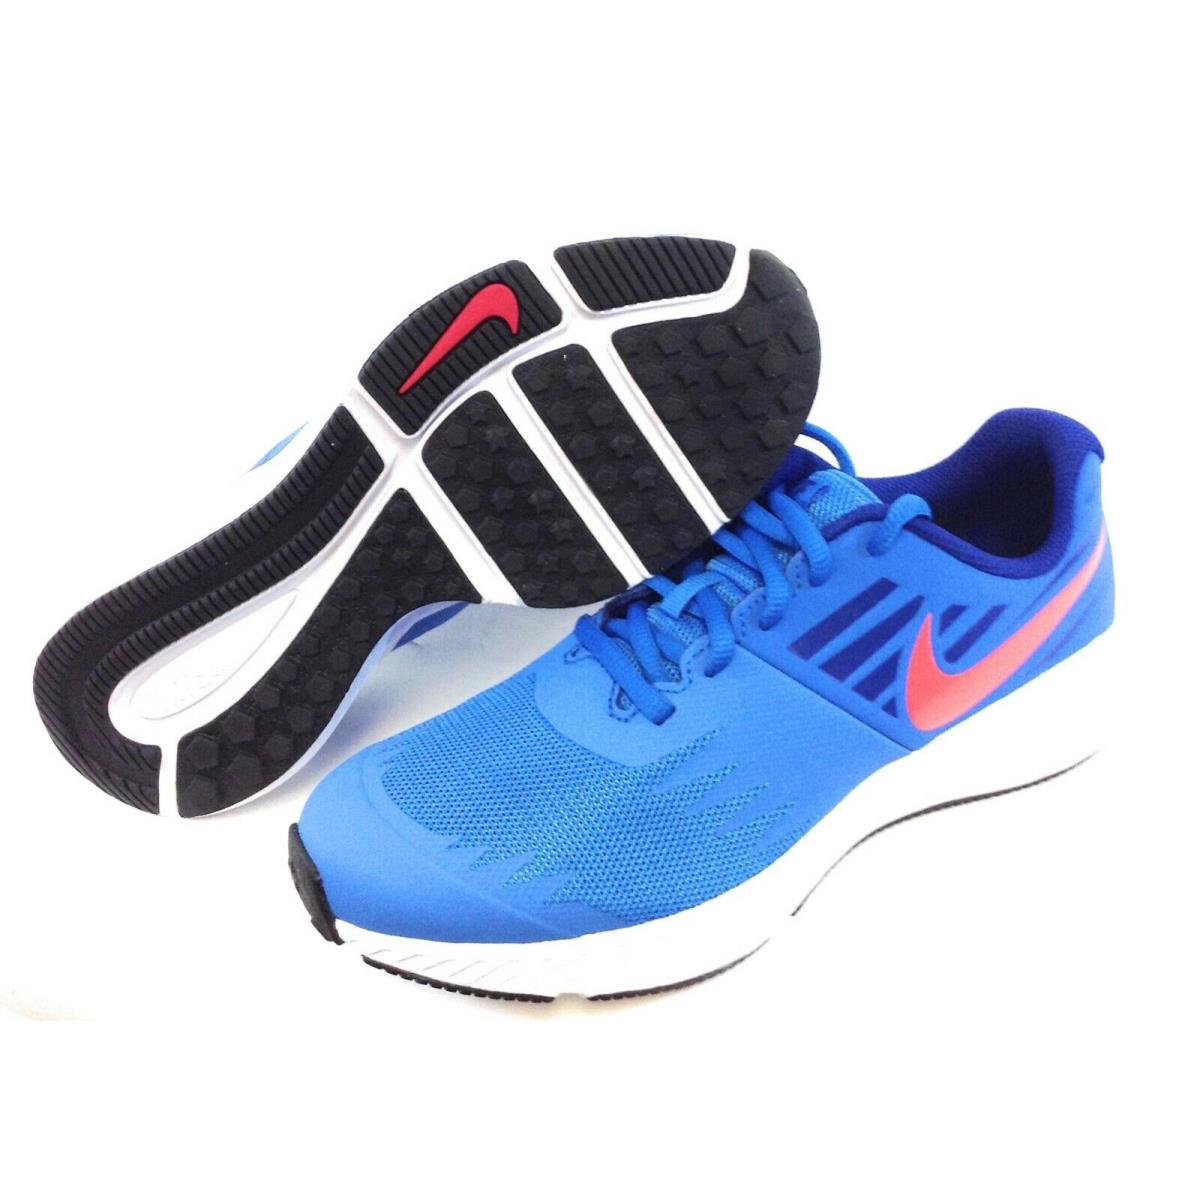 Boys Kids Youth Nike Star Runner 907254 408 Photo Blue Red Orbit Sneakers Shoes - Blue